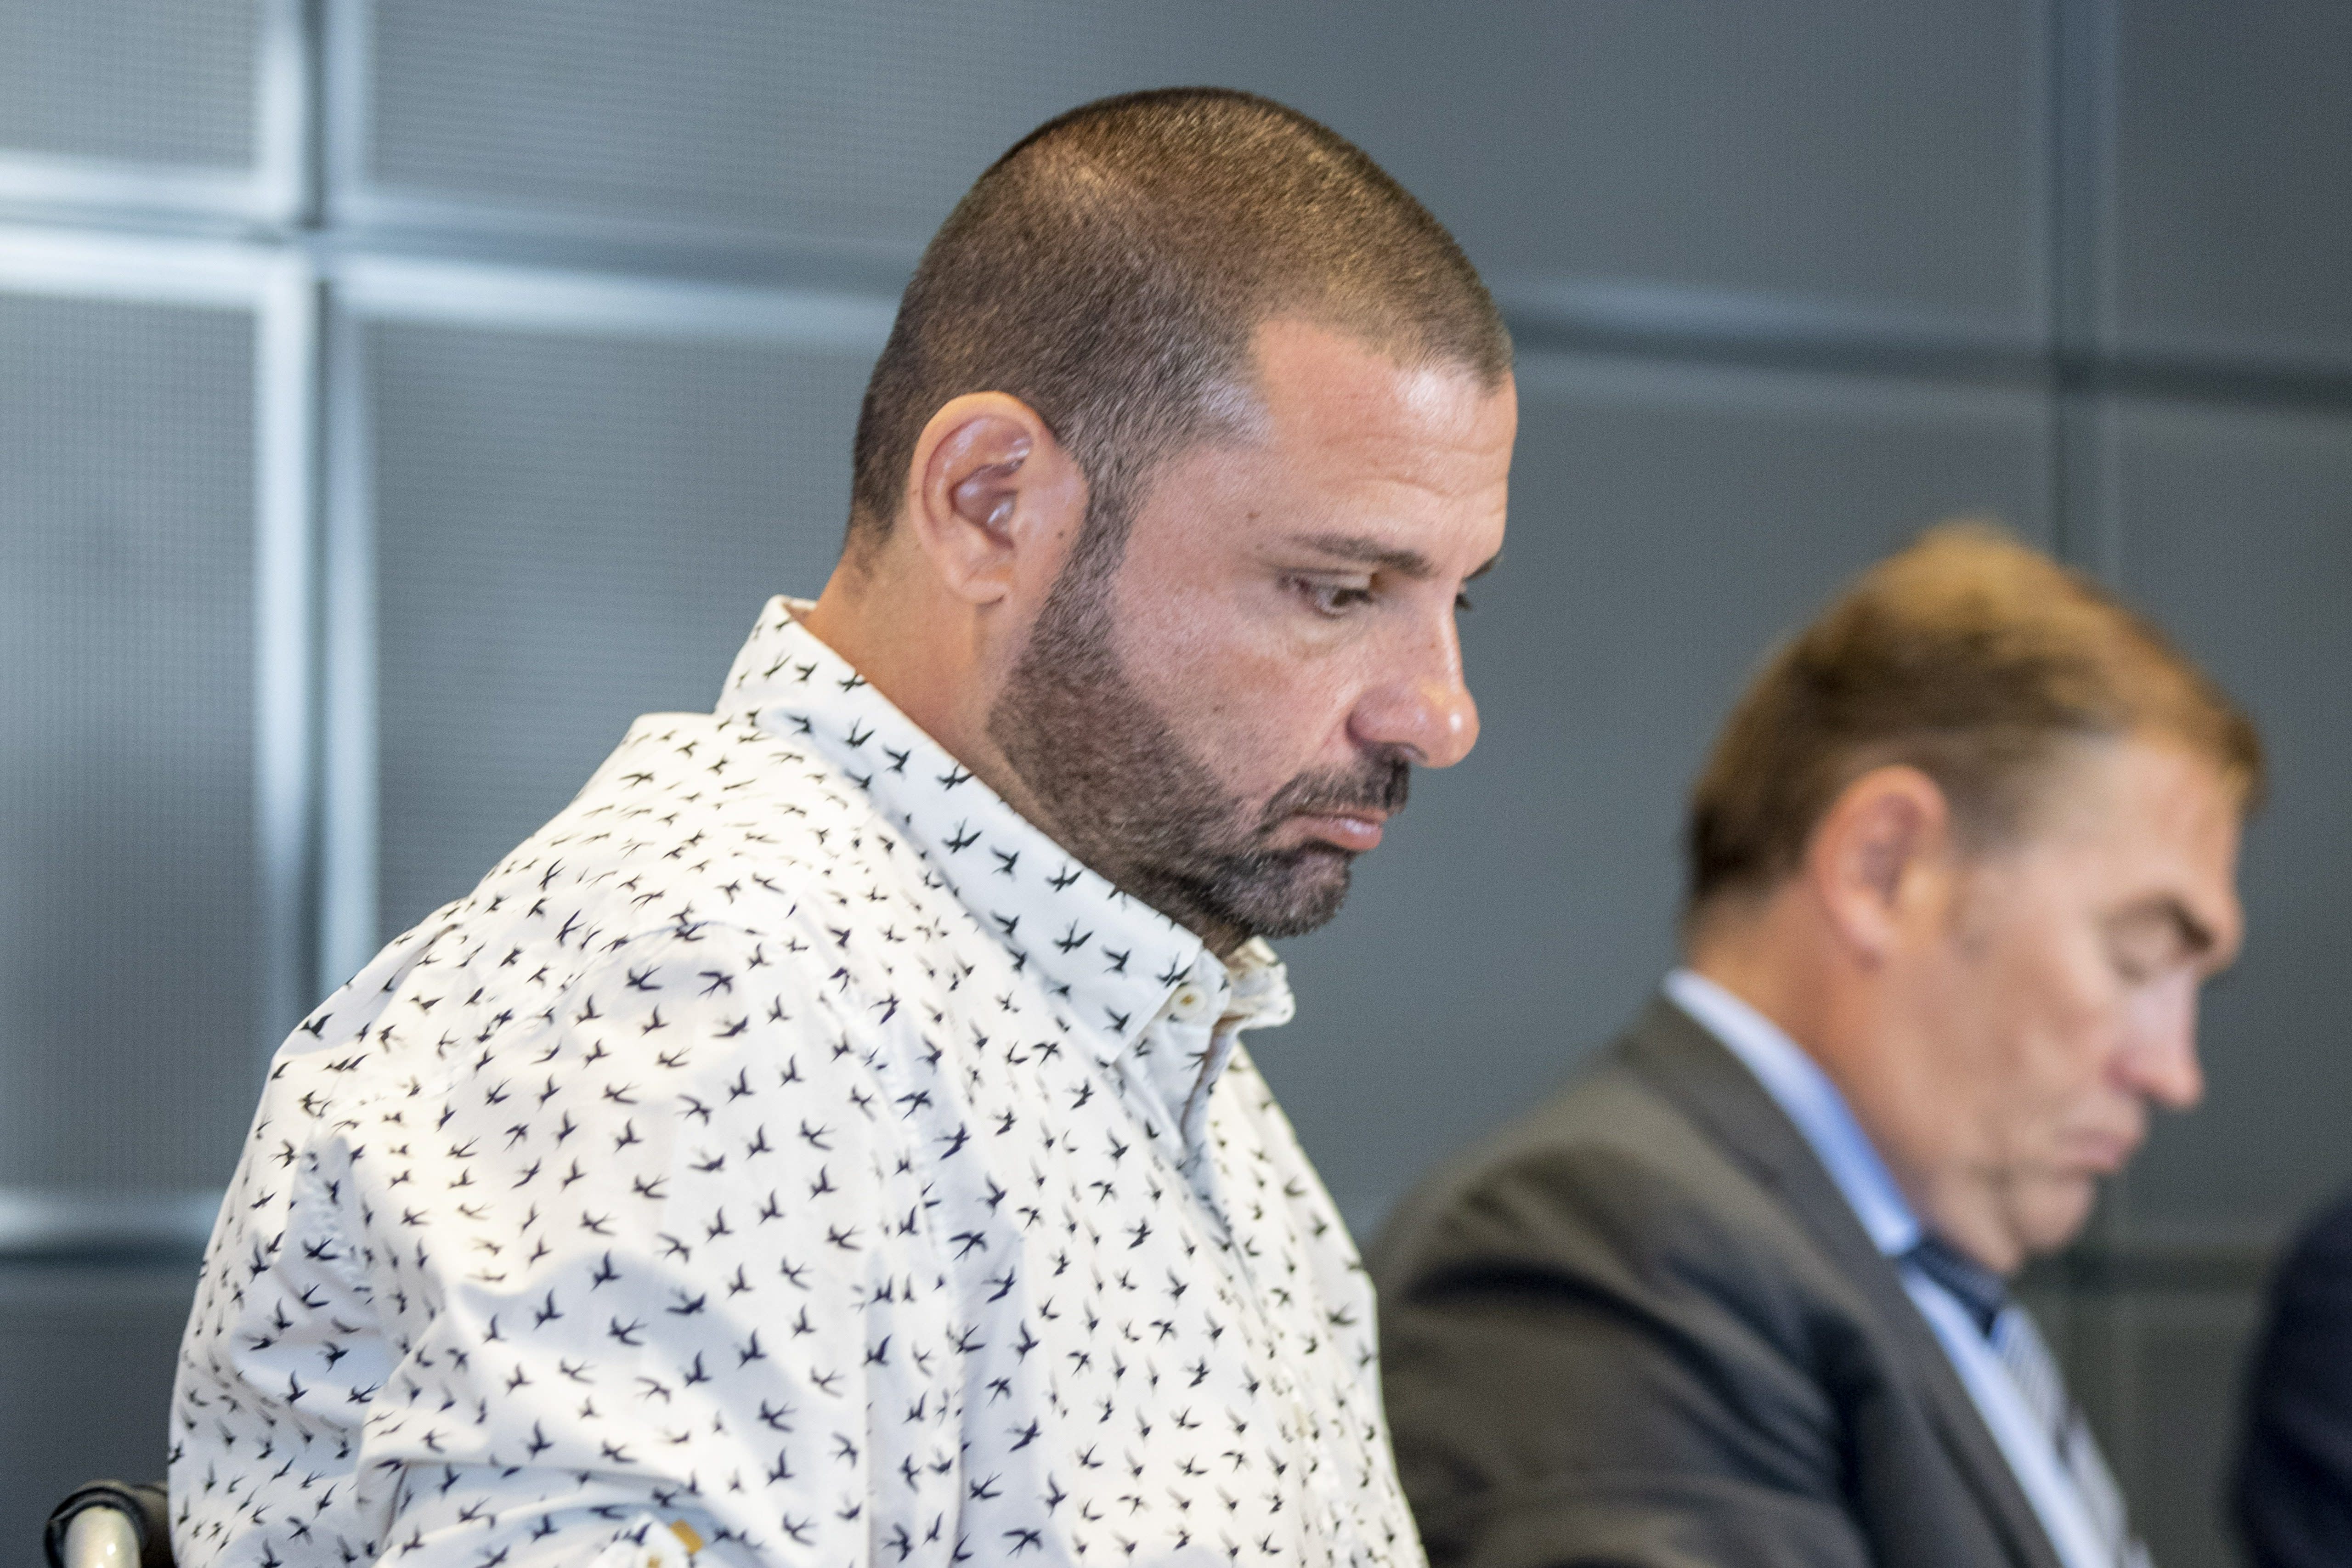 Turku terrorist hero gets a suspended sentence of 22 months for fraud, forgery and fundraising